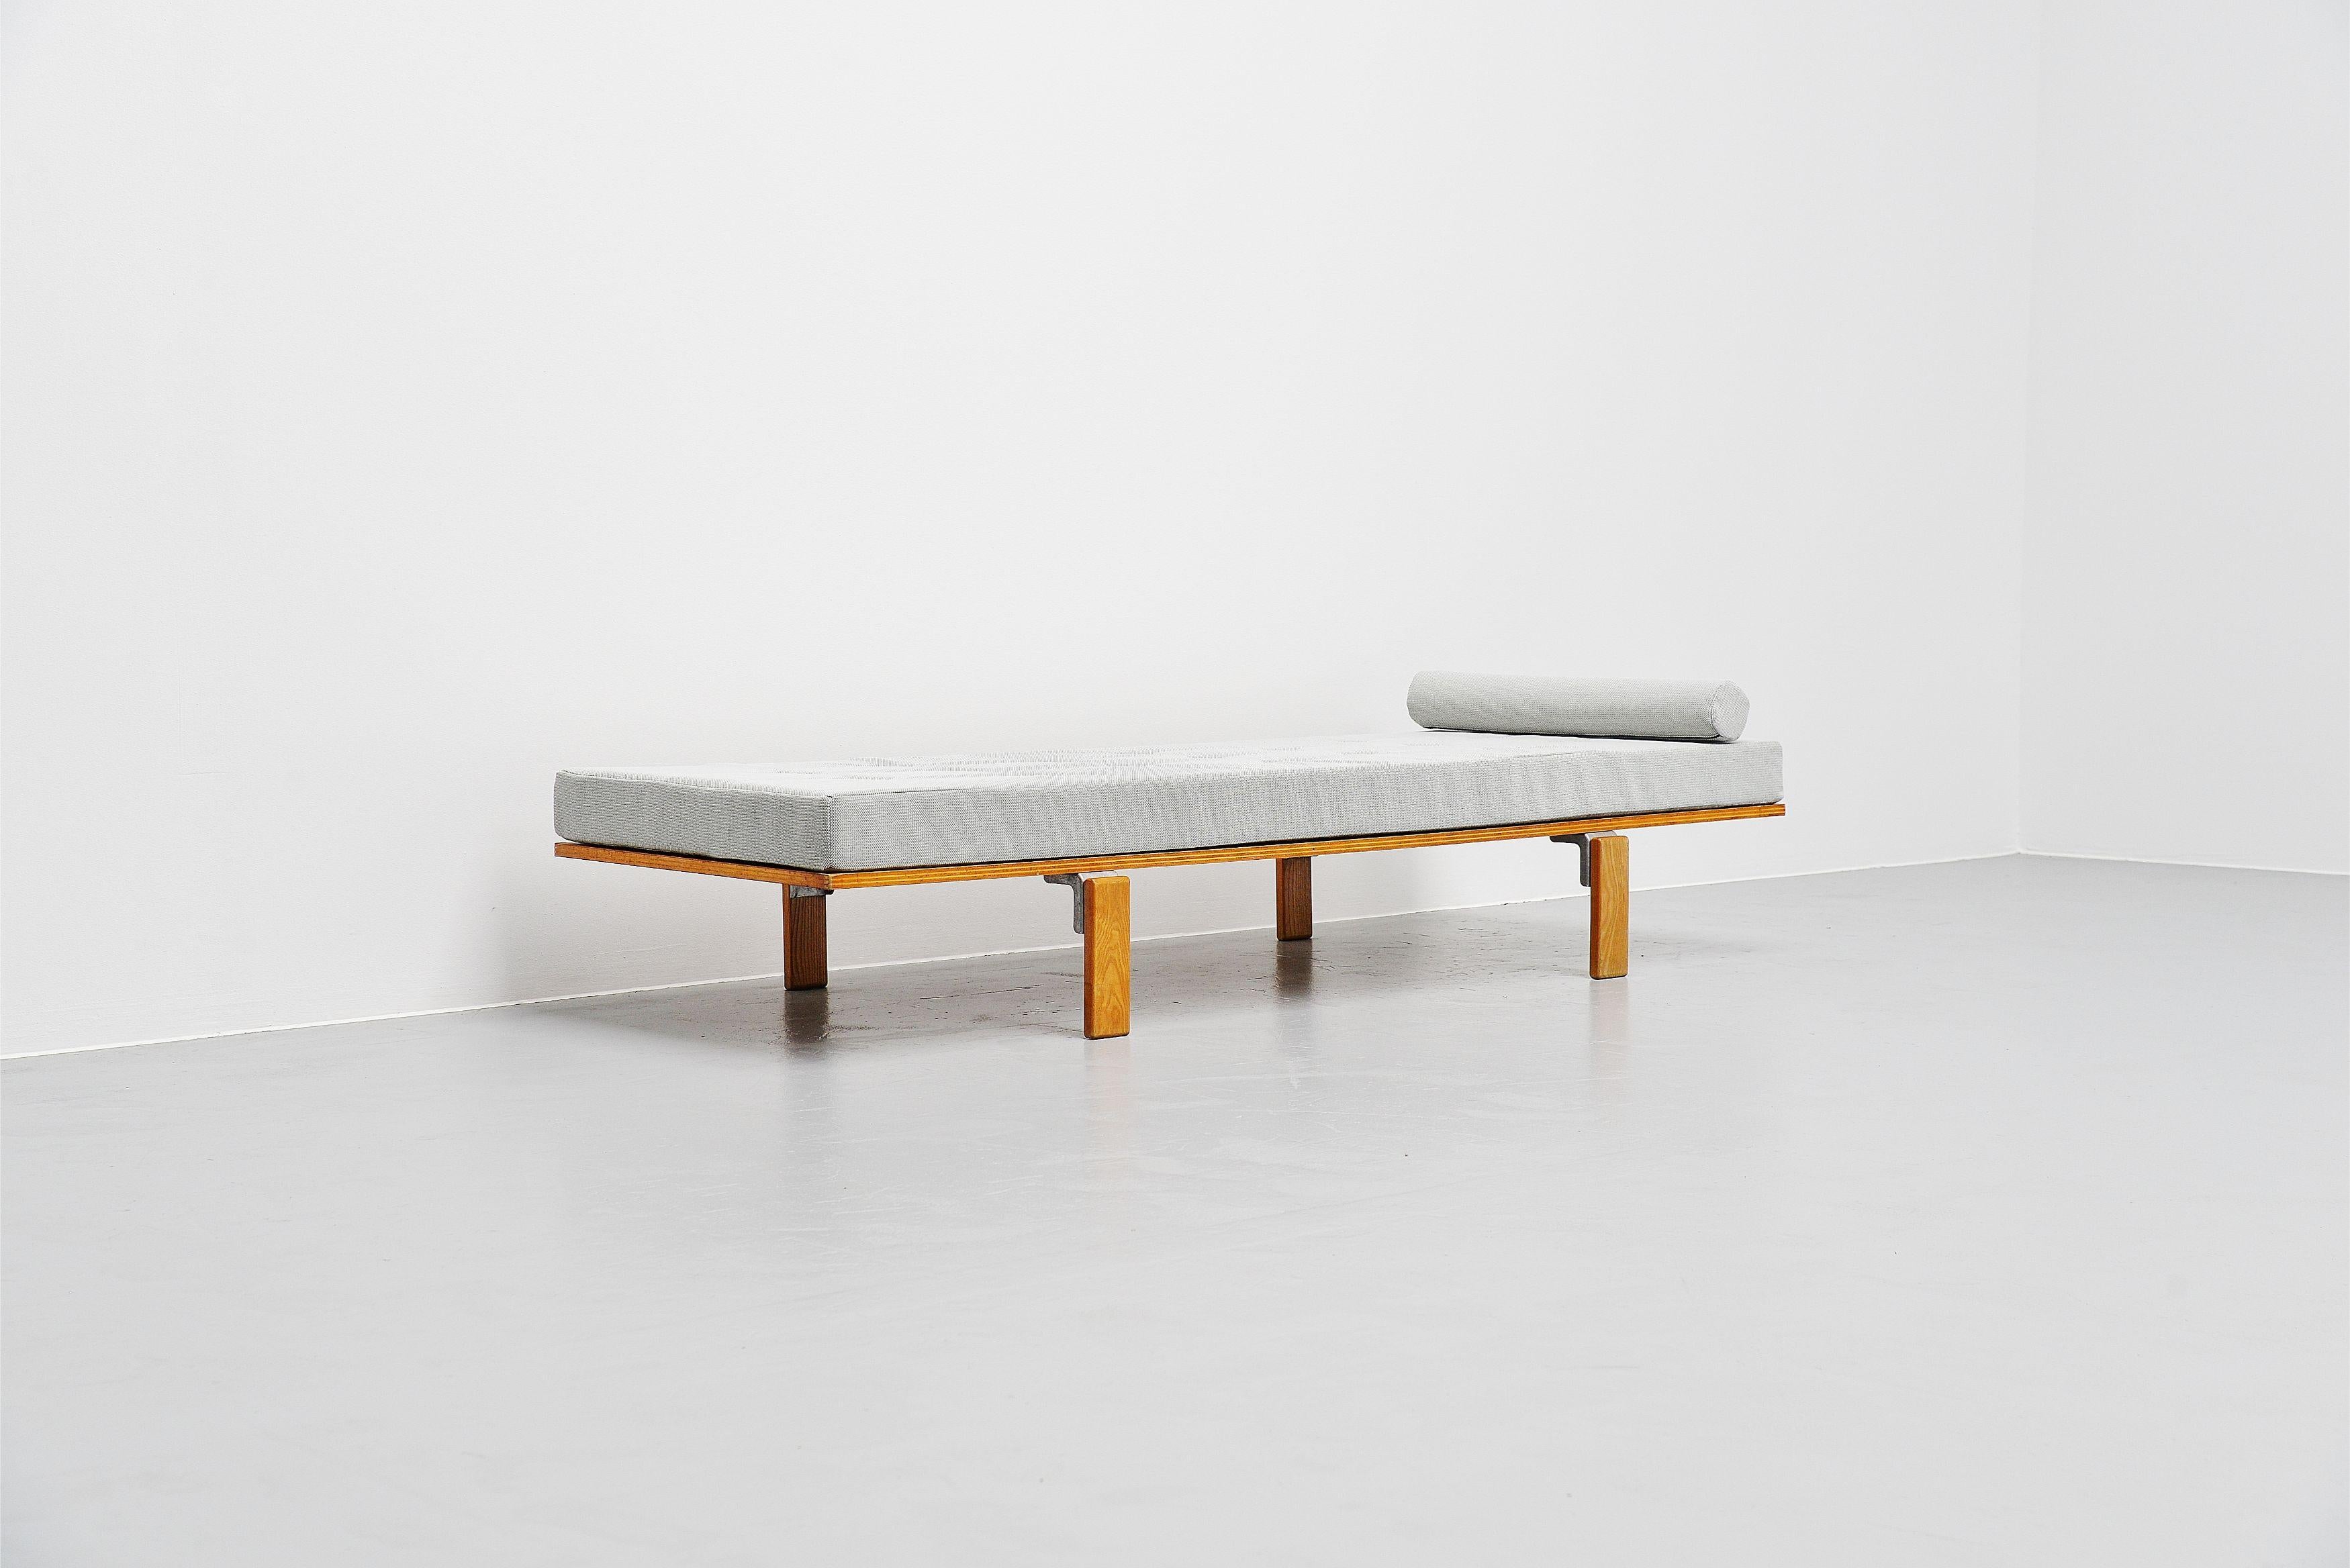 Rare Minimalist daybed called Plein designed by Georges Candilis and Anja Blomstedt, manufactured by Sentou in France, 1969. Designed for the residence 